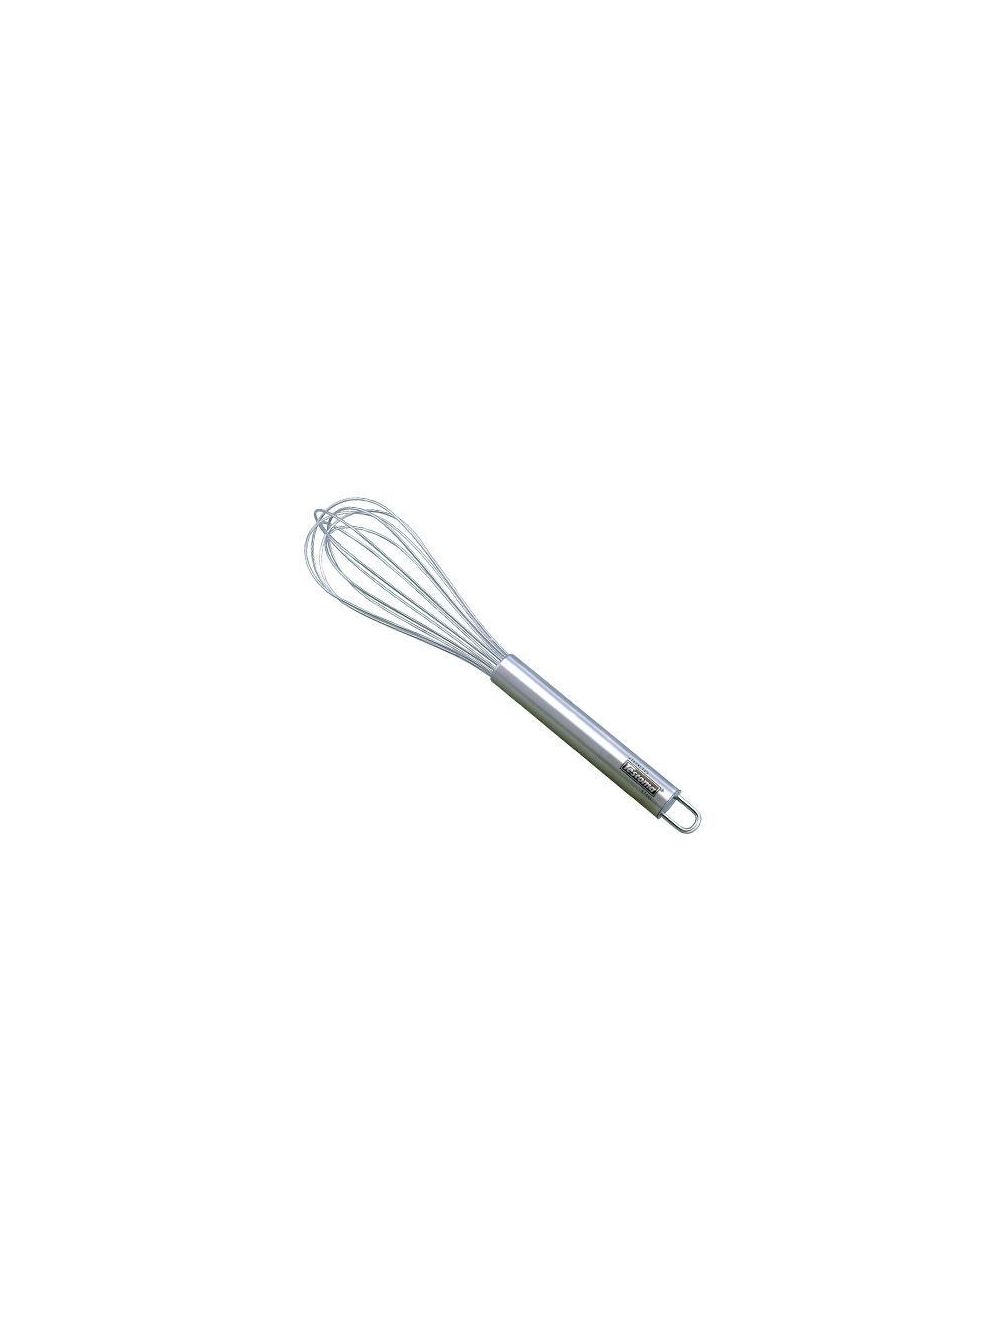 Stainless Steel Eggwhisk Delicia 20cm